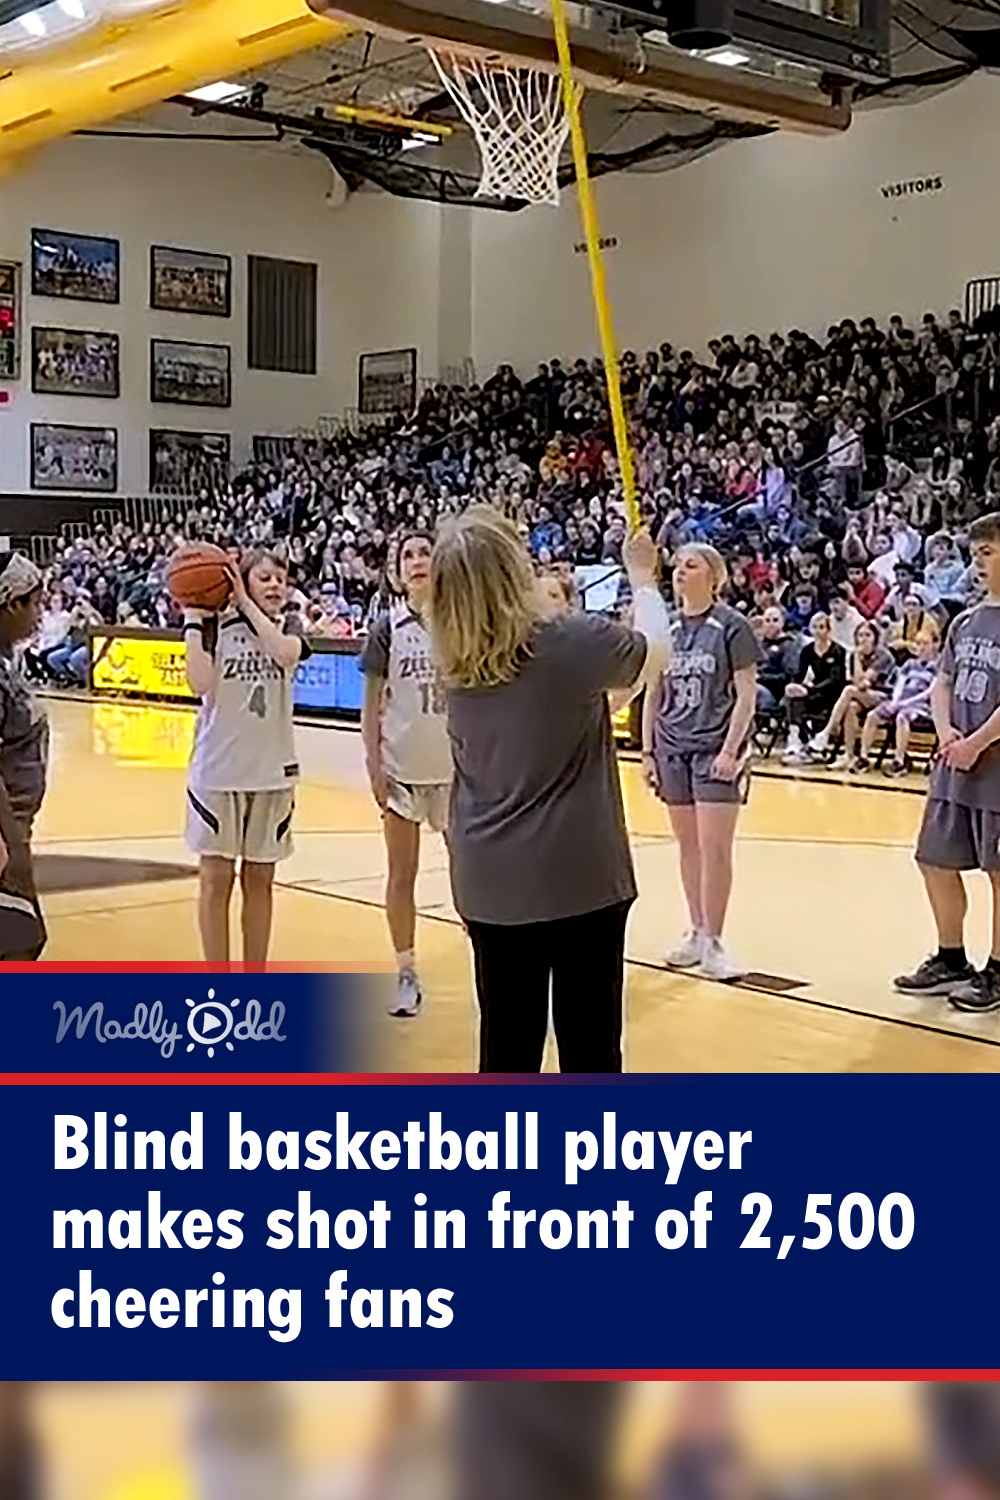 Blind basketball player makes shot in front of 2,500 cheering fans